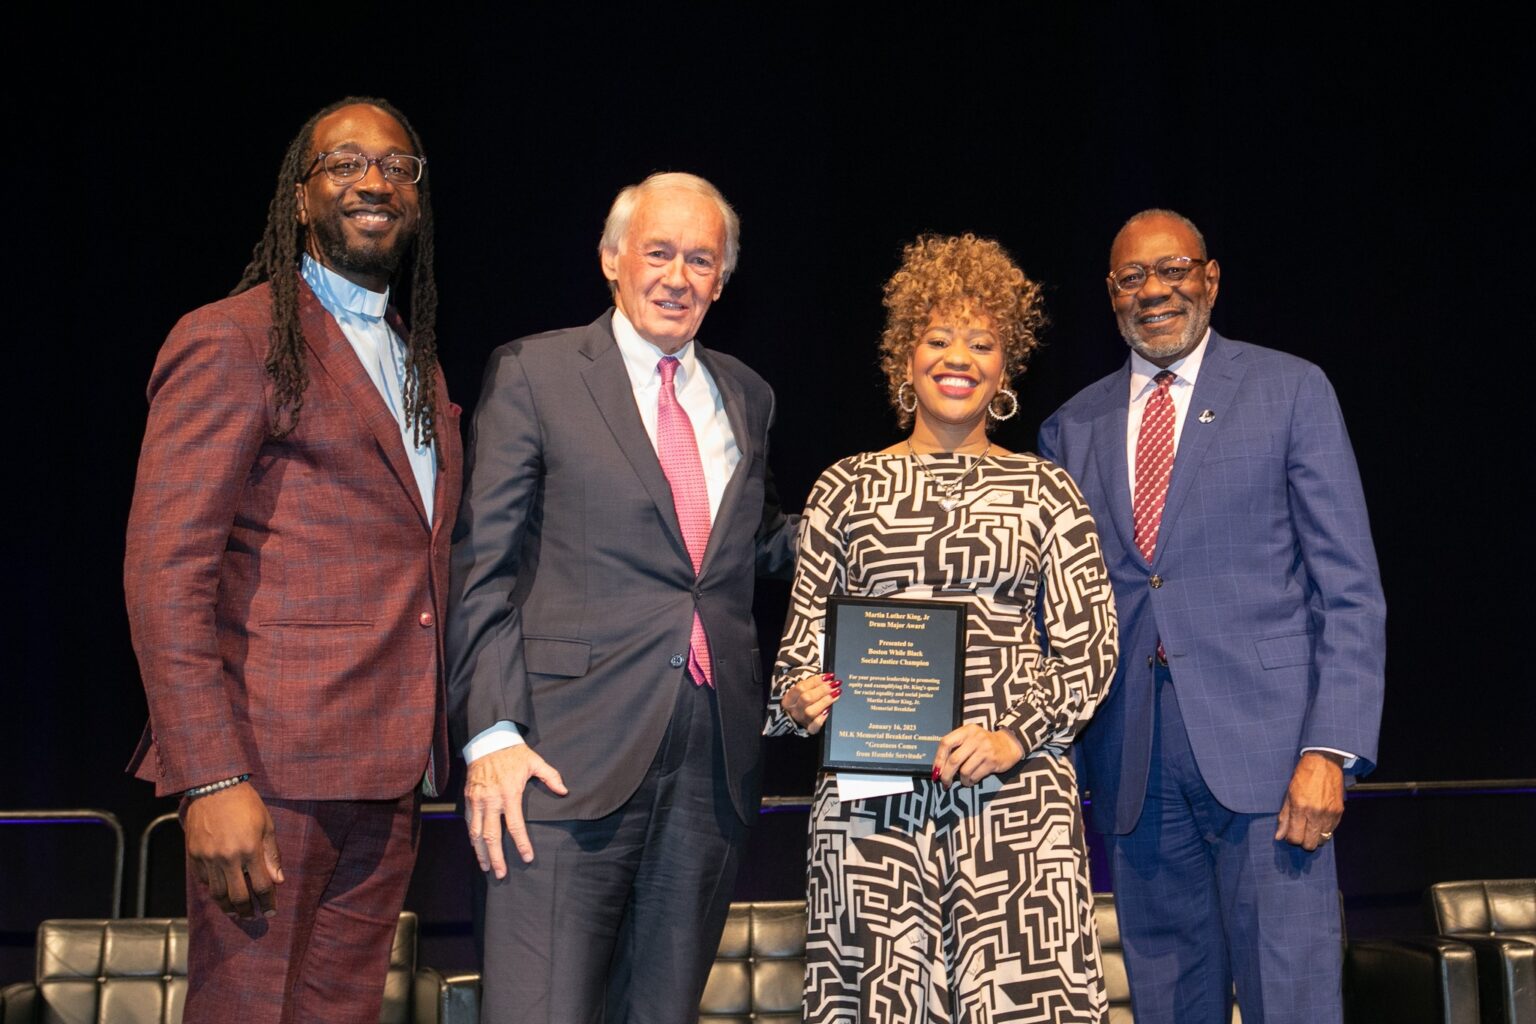 Sheena Collier, representing Boston While Black, accepts the 2023 Drum Major Award with Sen. Ed Markey and MLK Memorial Breakfast Committee Co-Chairs Rev. Dr. Jay Williams and James Dilday, Esq.